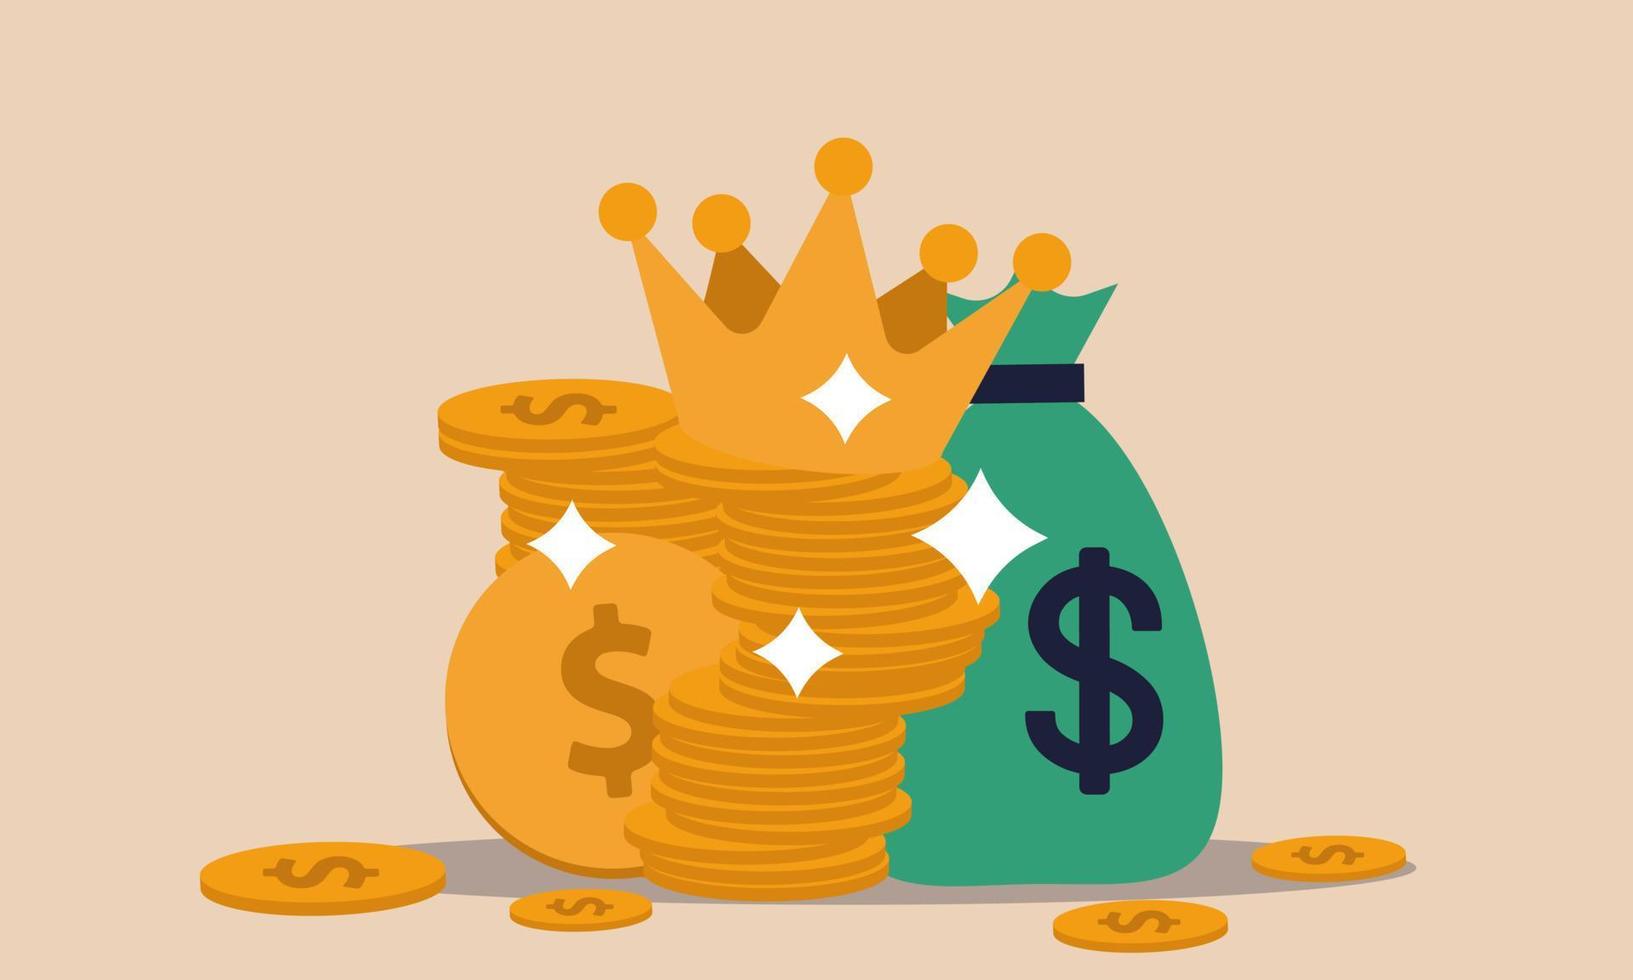 Loan budget king with crown and luxury profit dollar. Investment to economy and value wealth vector illustration concept. Capital company savings and business royal. Business gold and winner leader